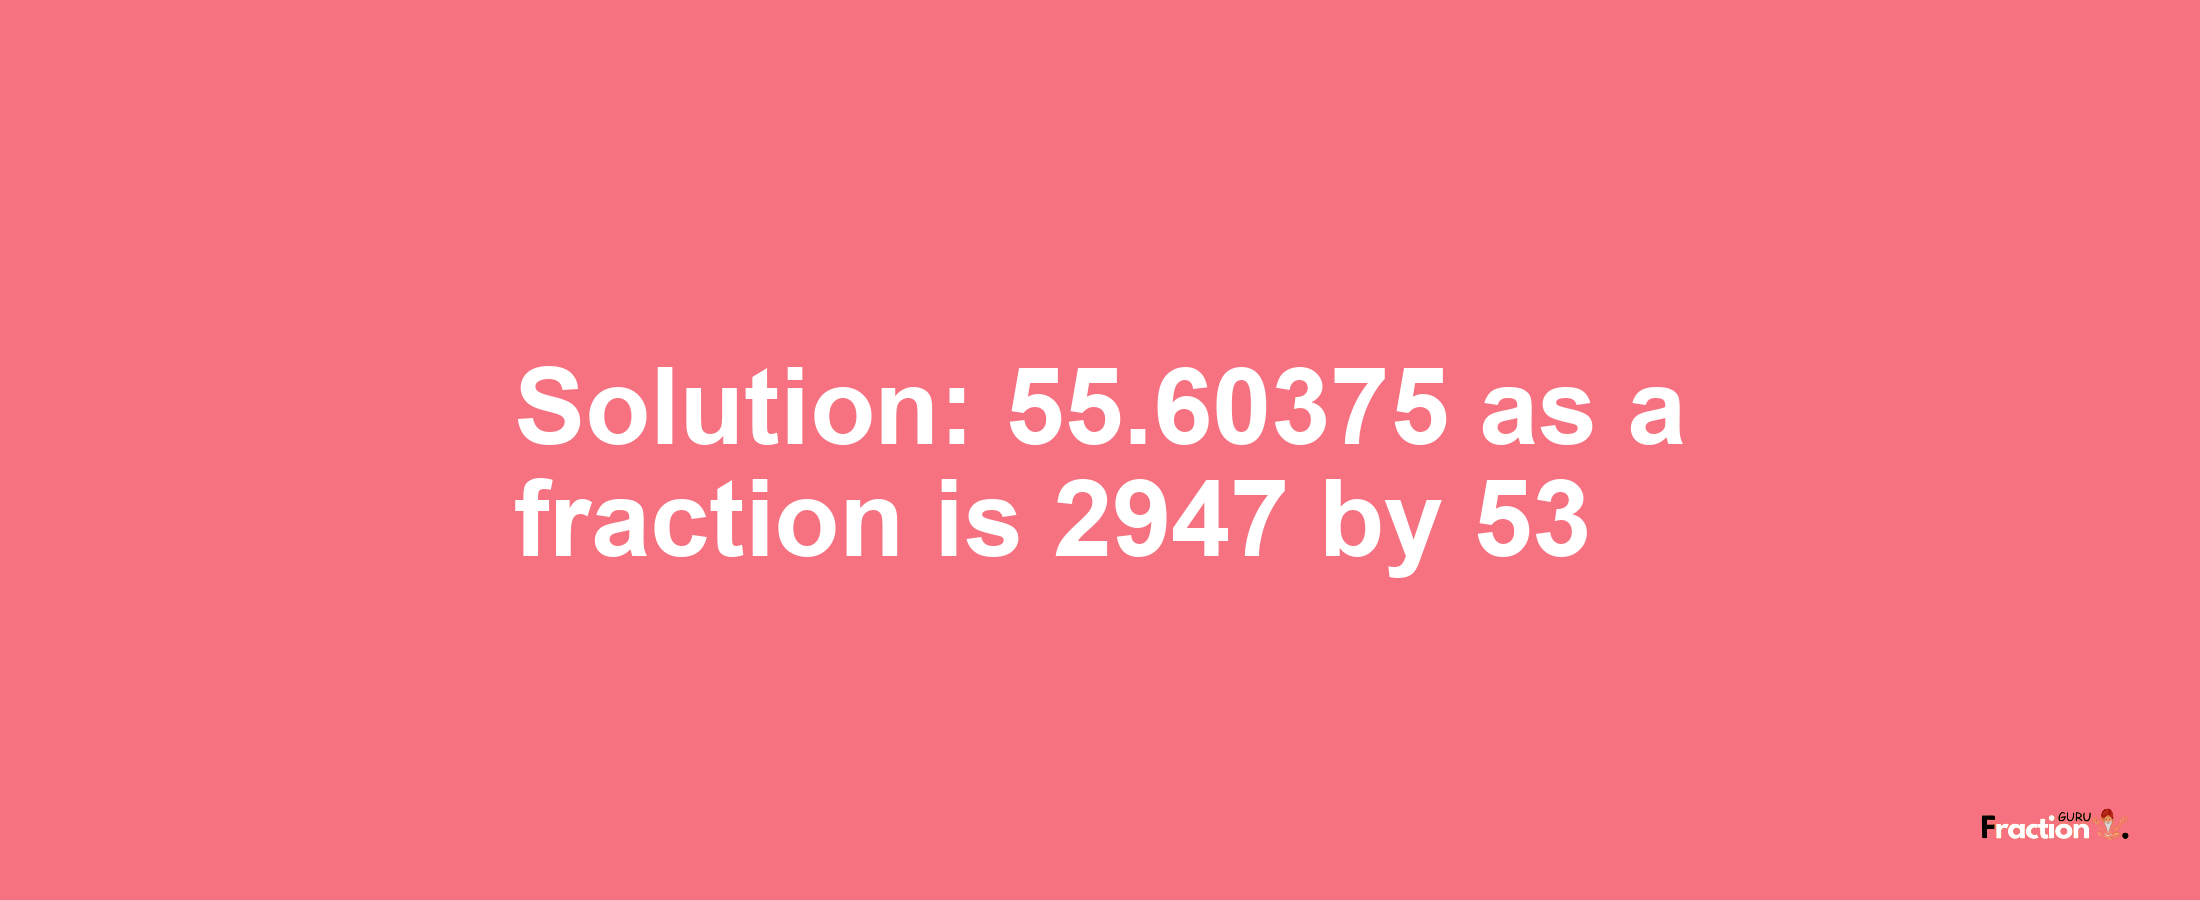 Solution:55.60375 as a fraction is 2947/53